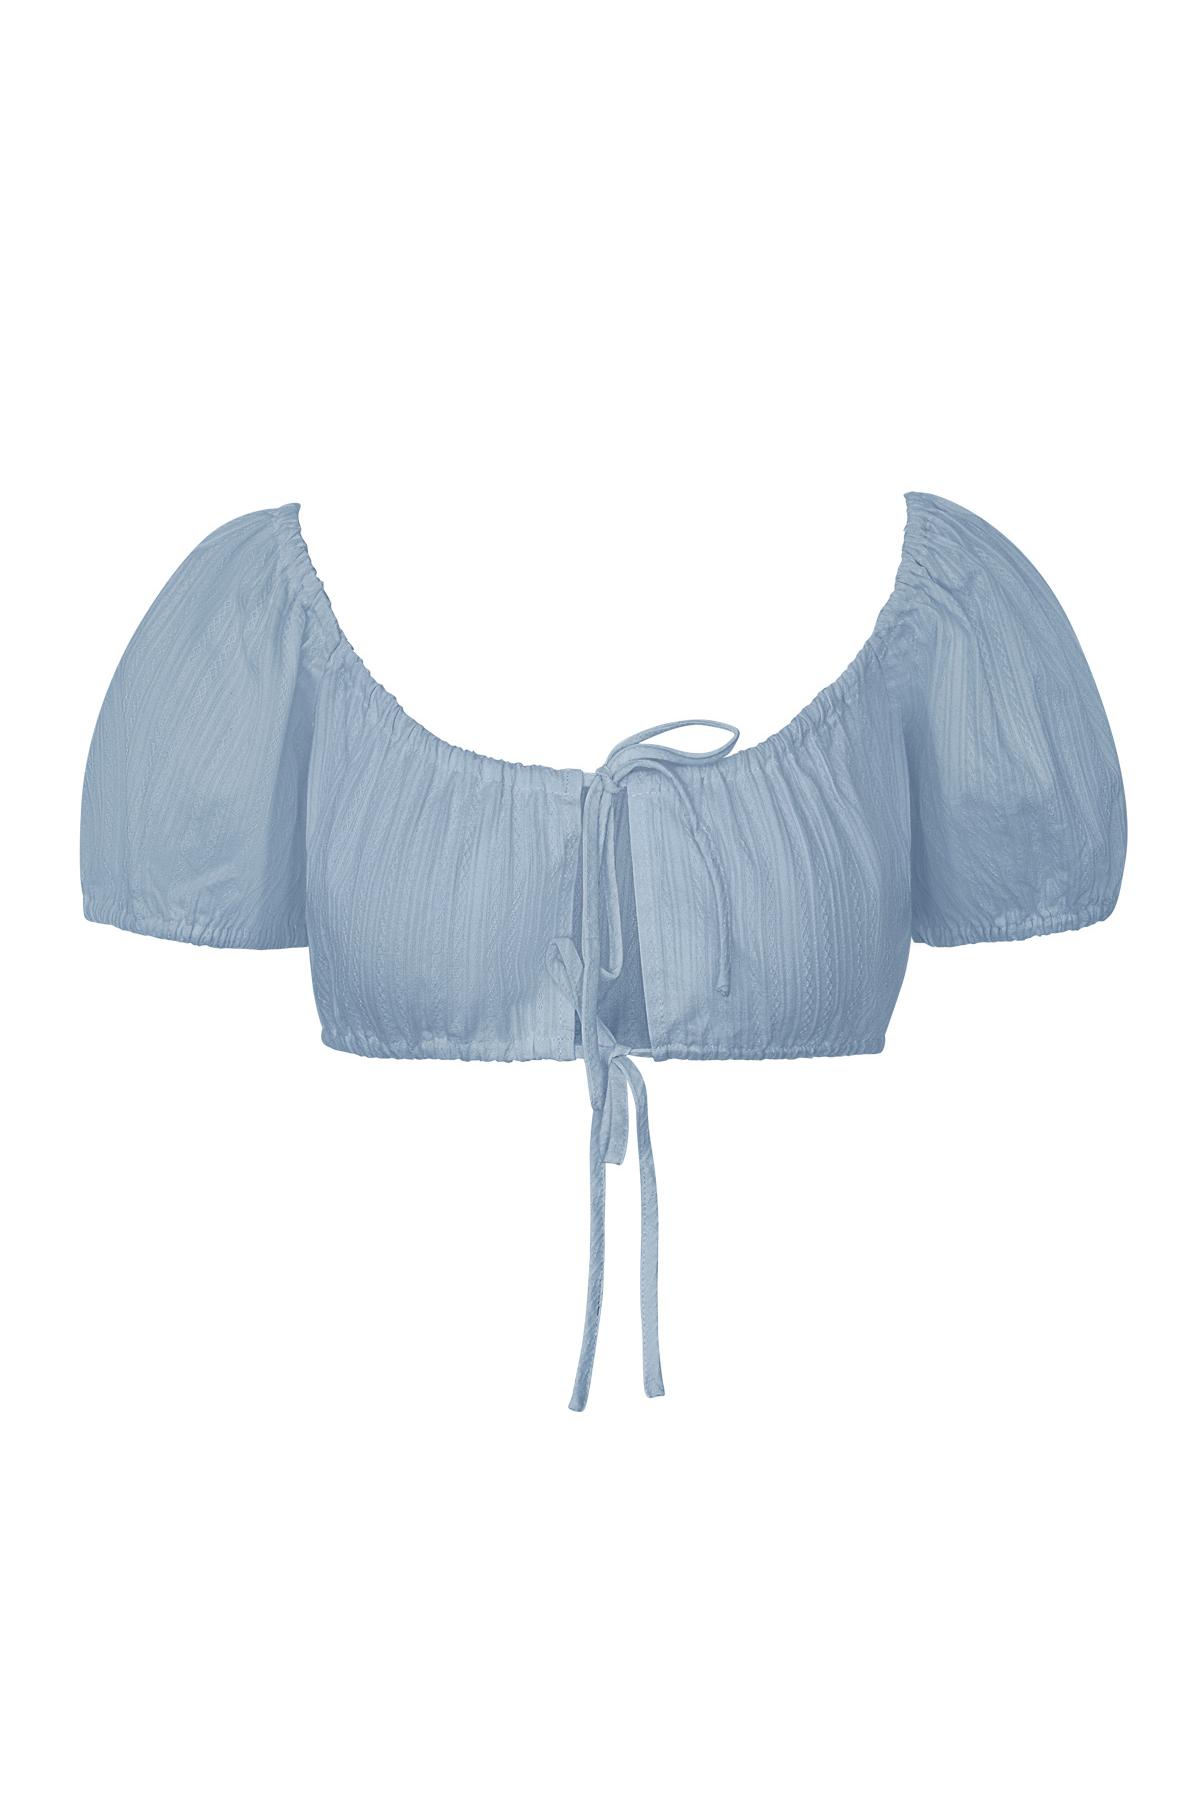 Crop top knotted Blue S h5 